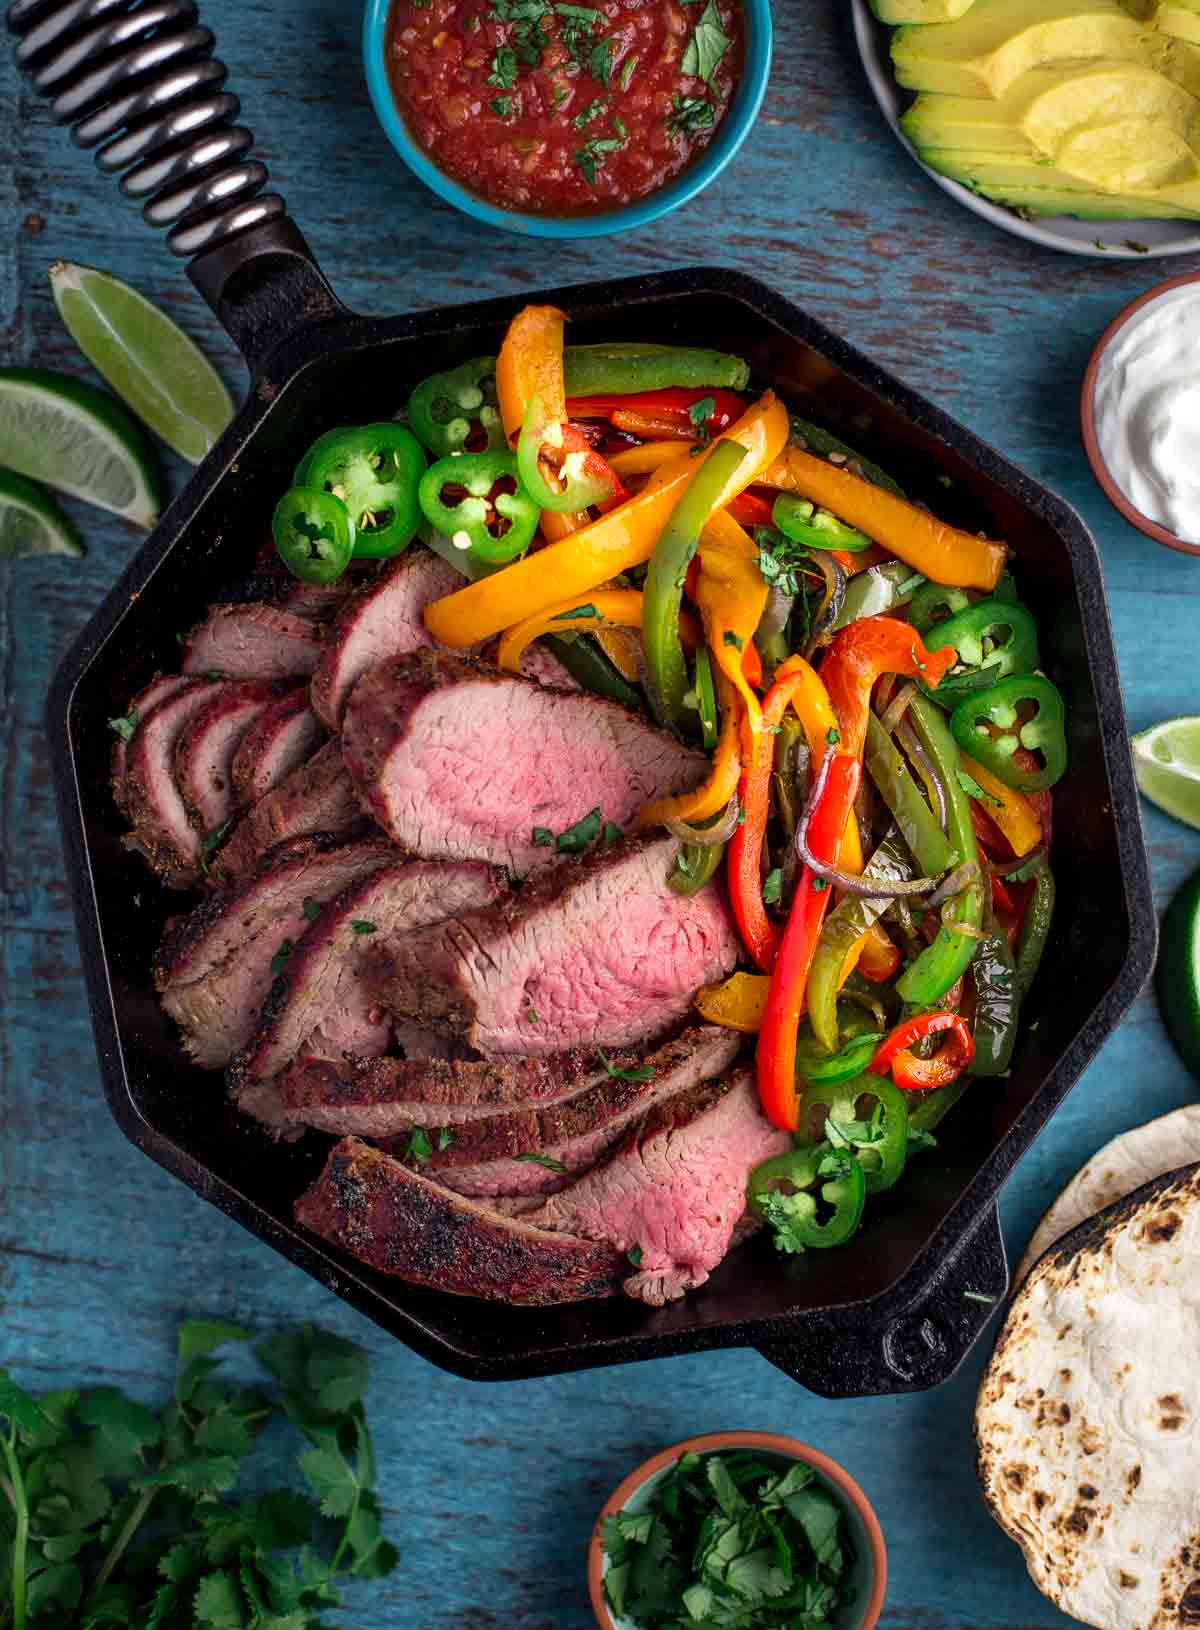 Tri tip slices with onions and peppers in a skillet for fajitas.